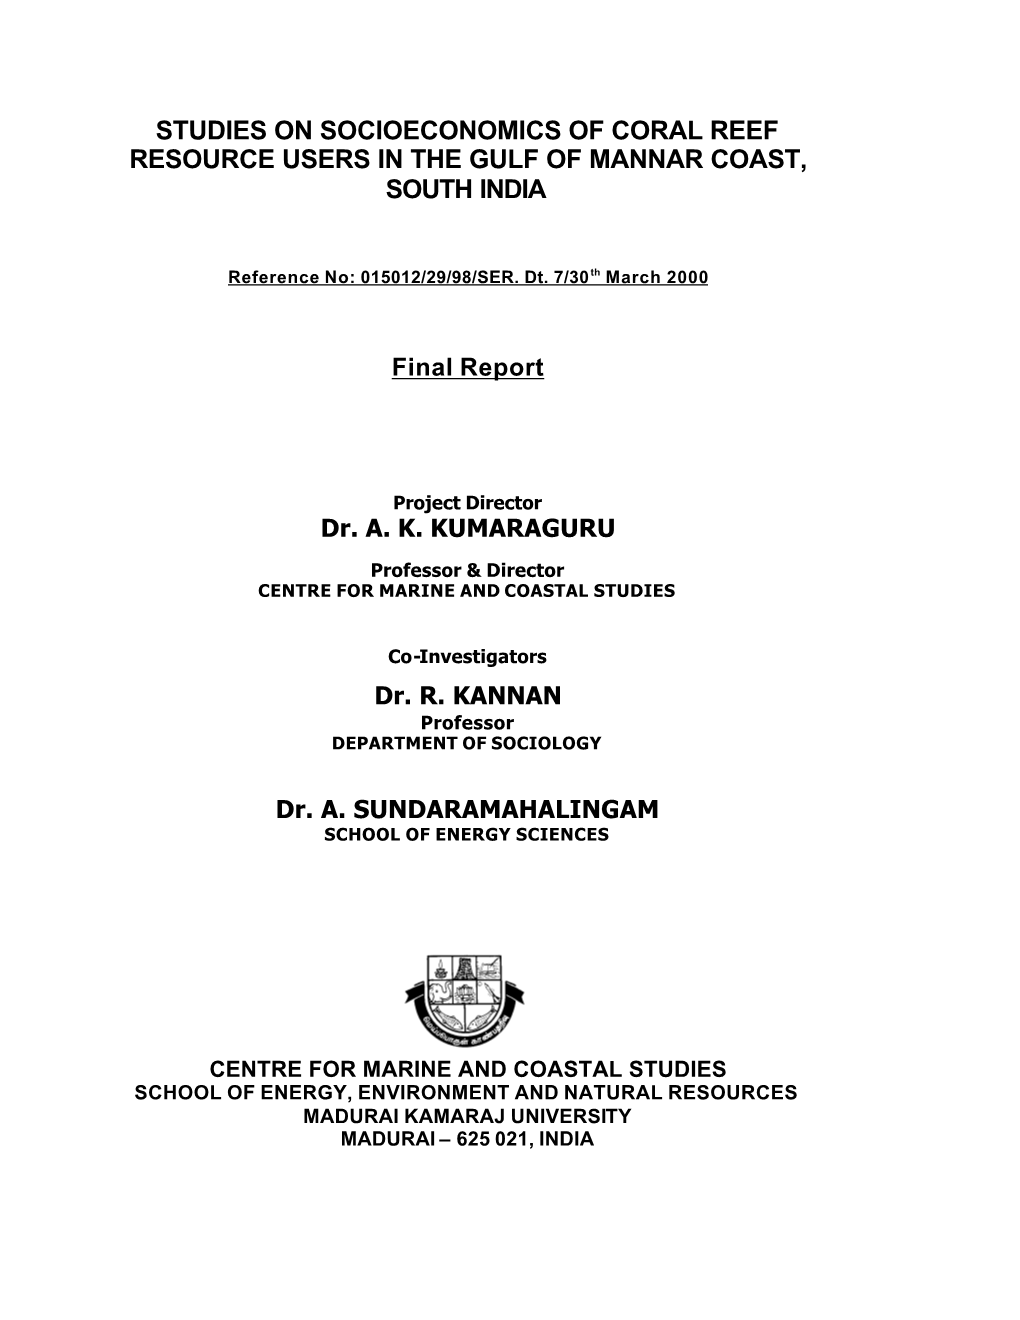 Coral Reef Resources Users in the Gulf of Mannar Coast, South India